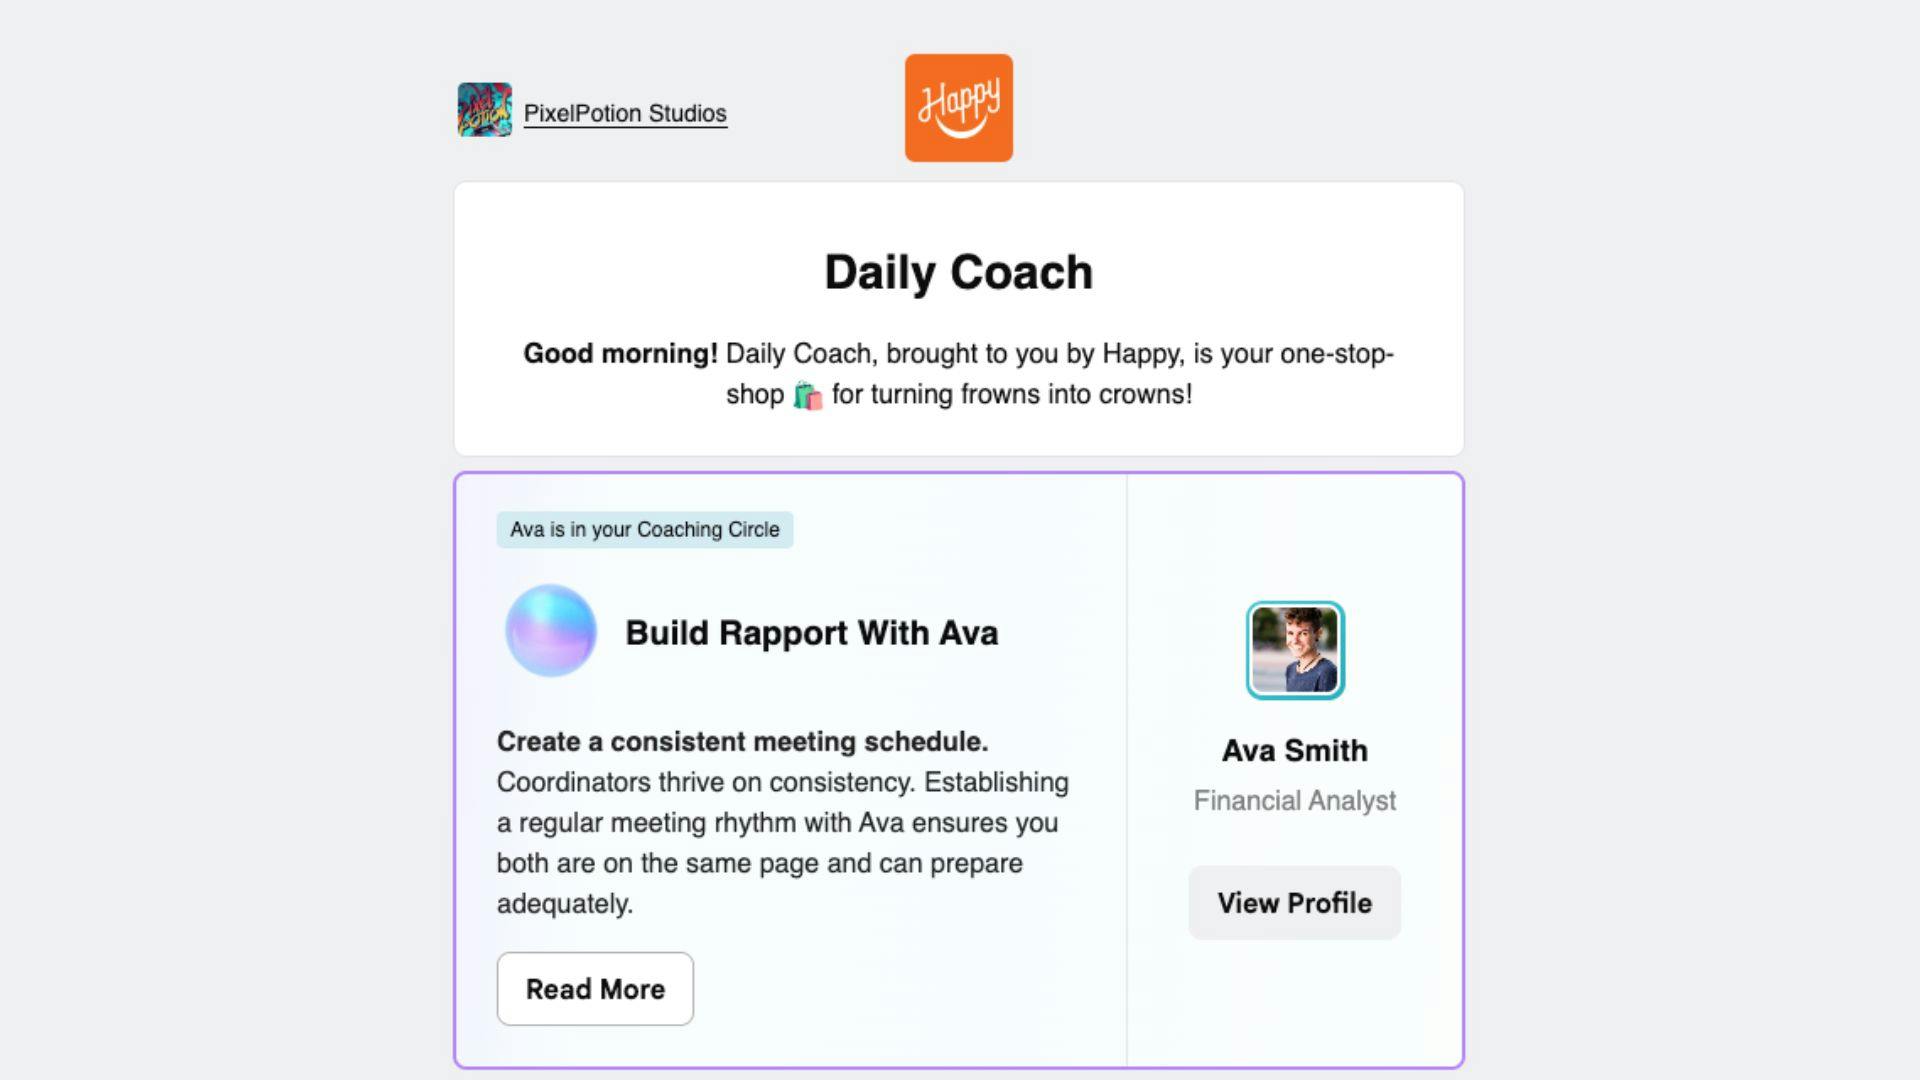 image showing daily coach received through email on a team member that is a part of the users coaching circle